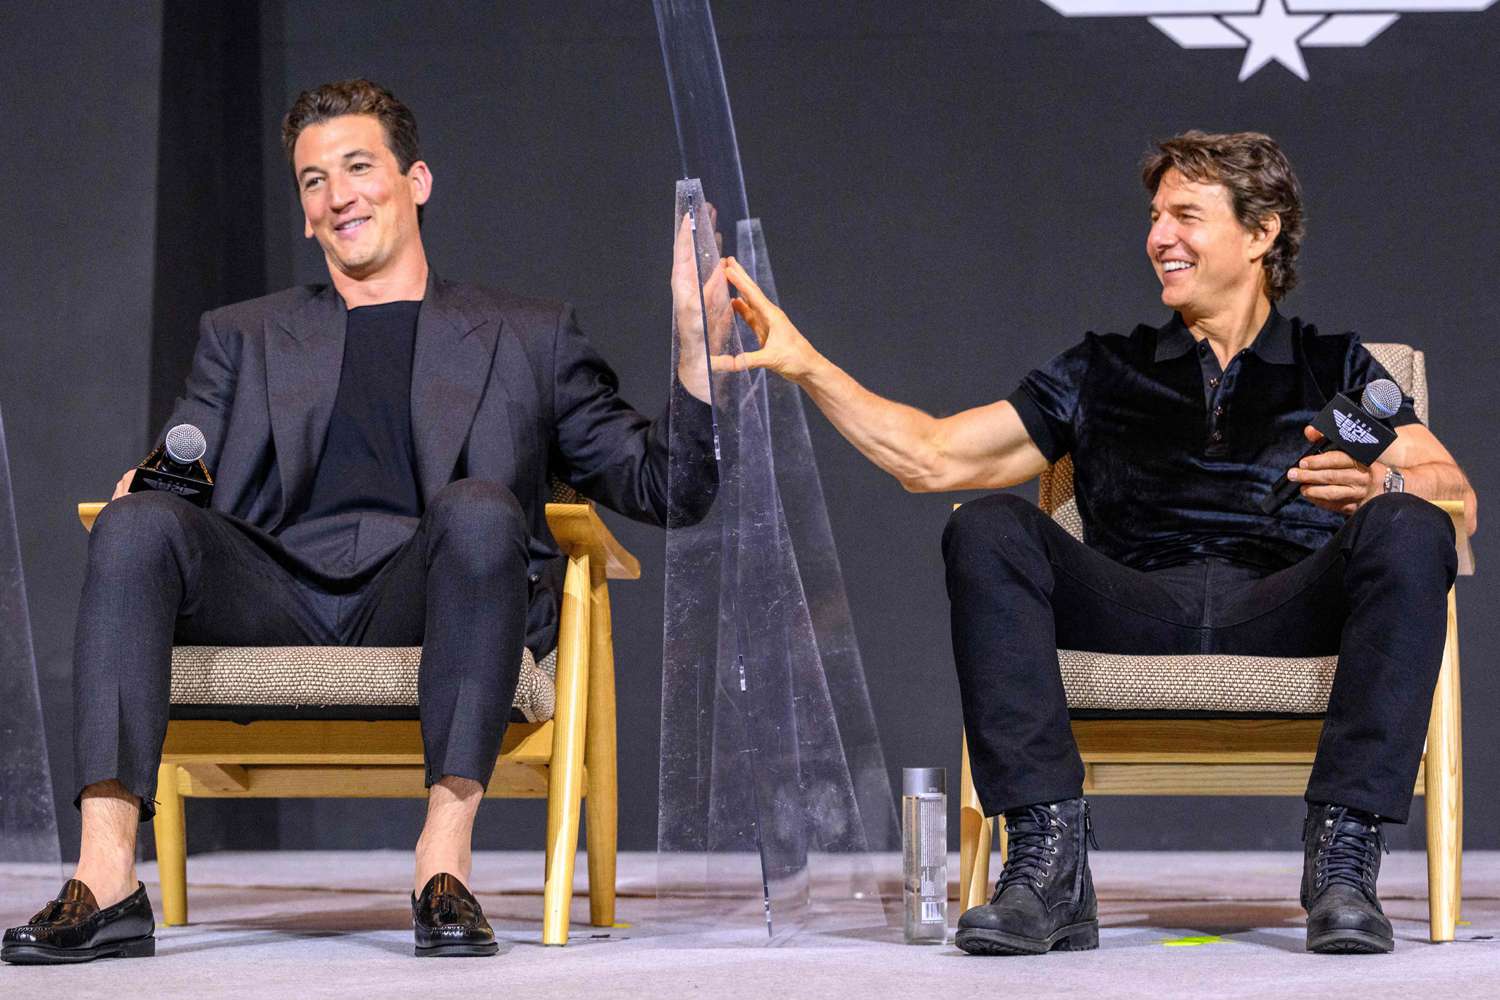 Miles Teller and Tom Cruise share a light moment during a press conference for the film 'Top Gun: Maverick' in Seoul